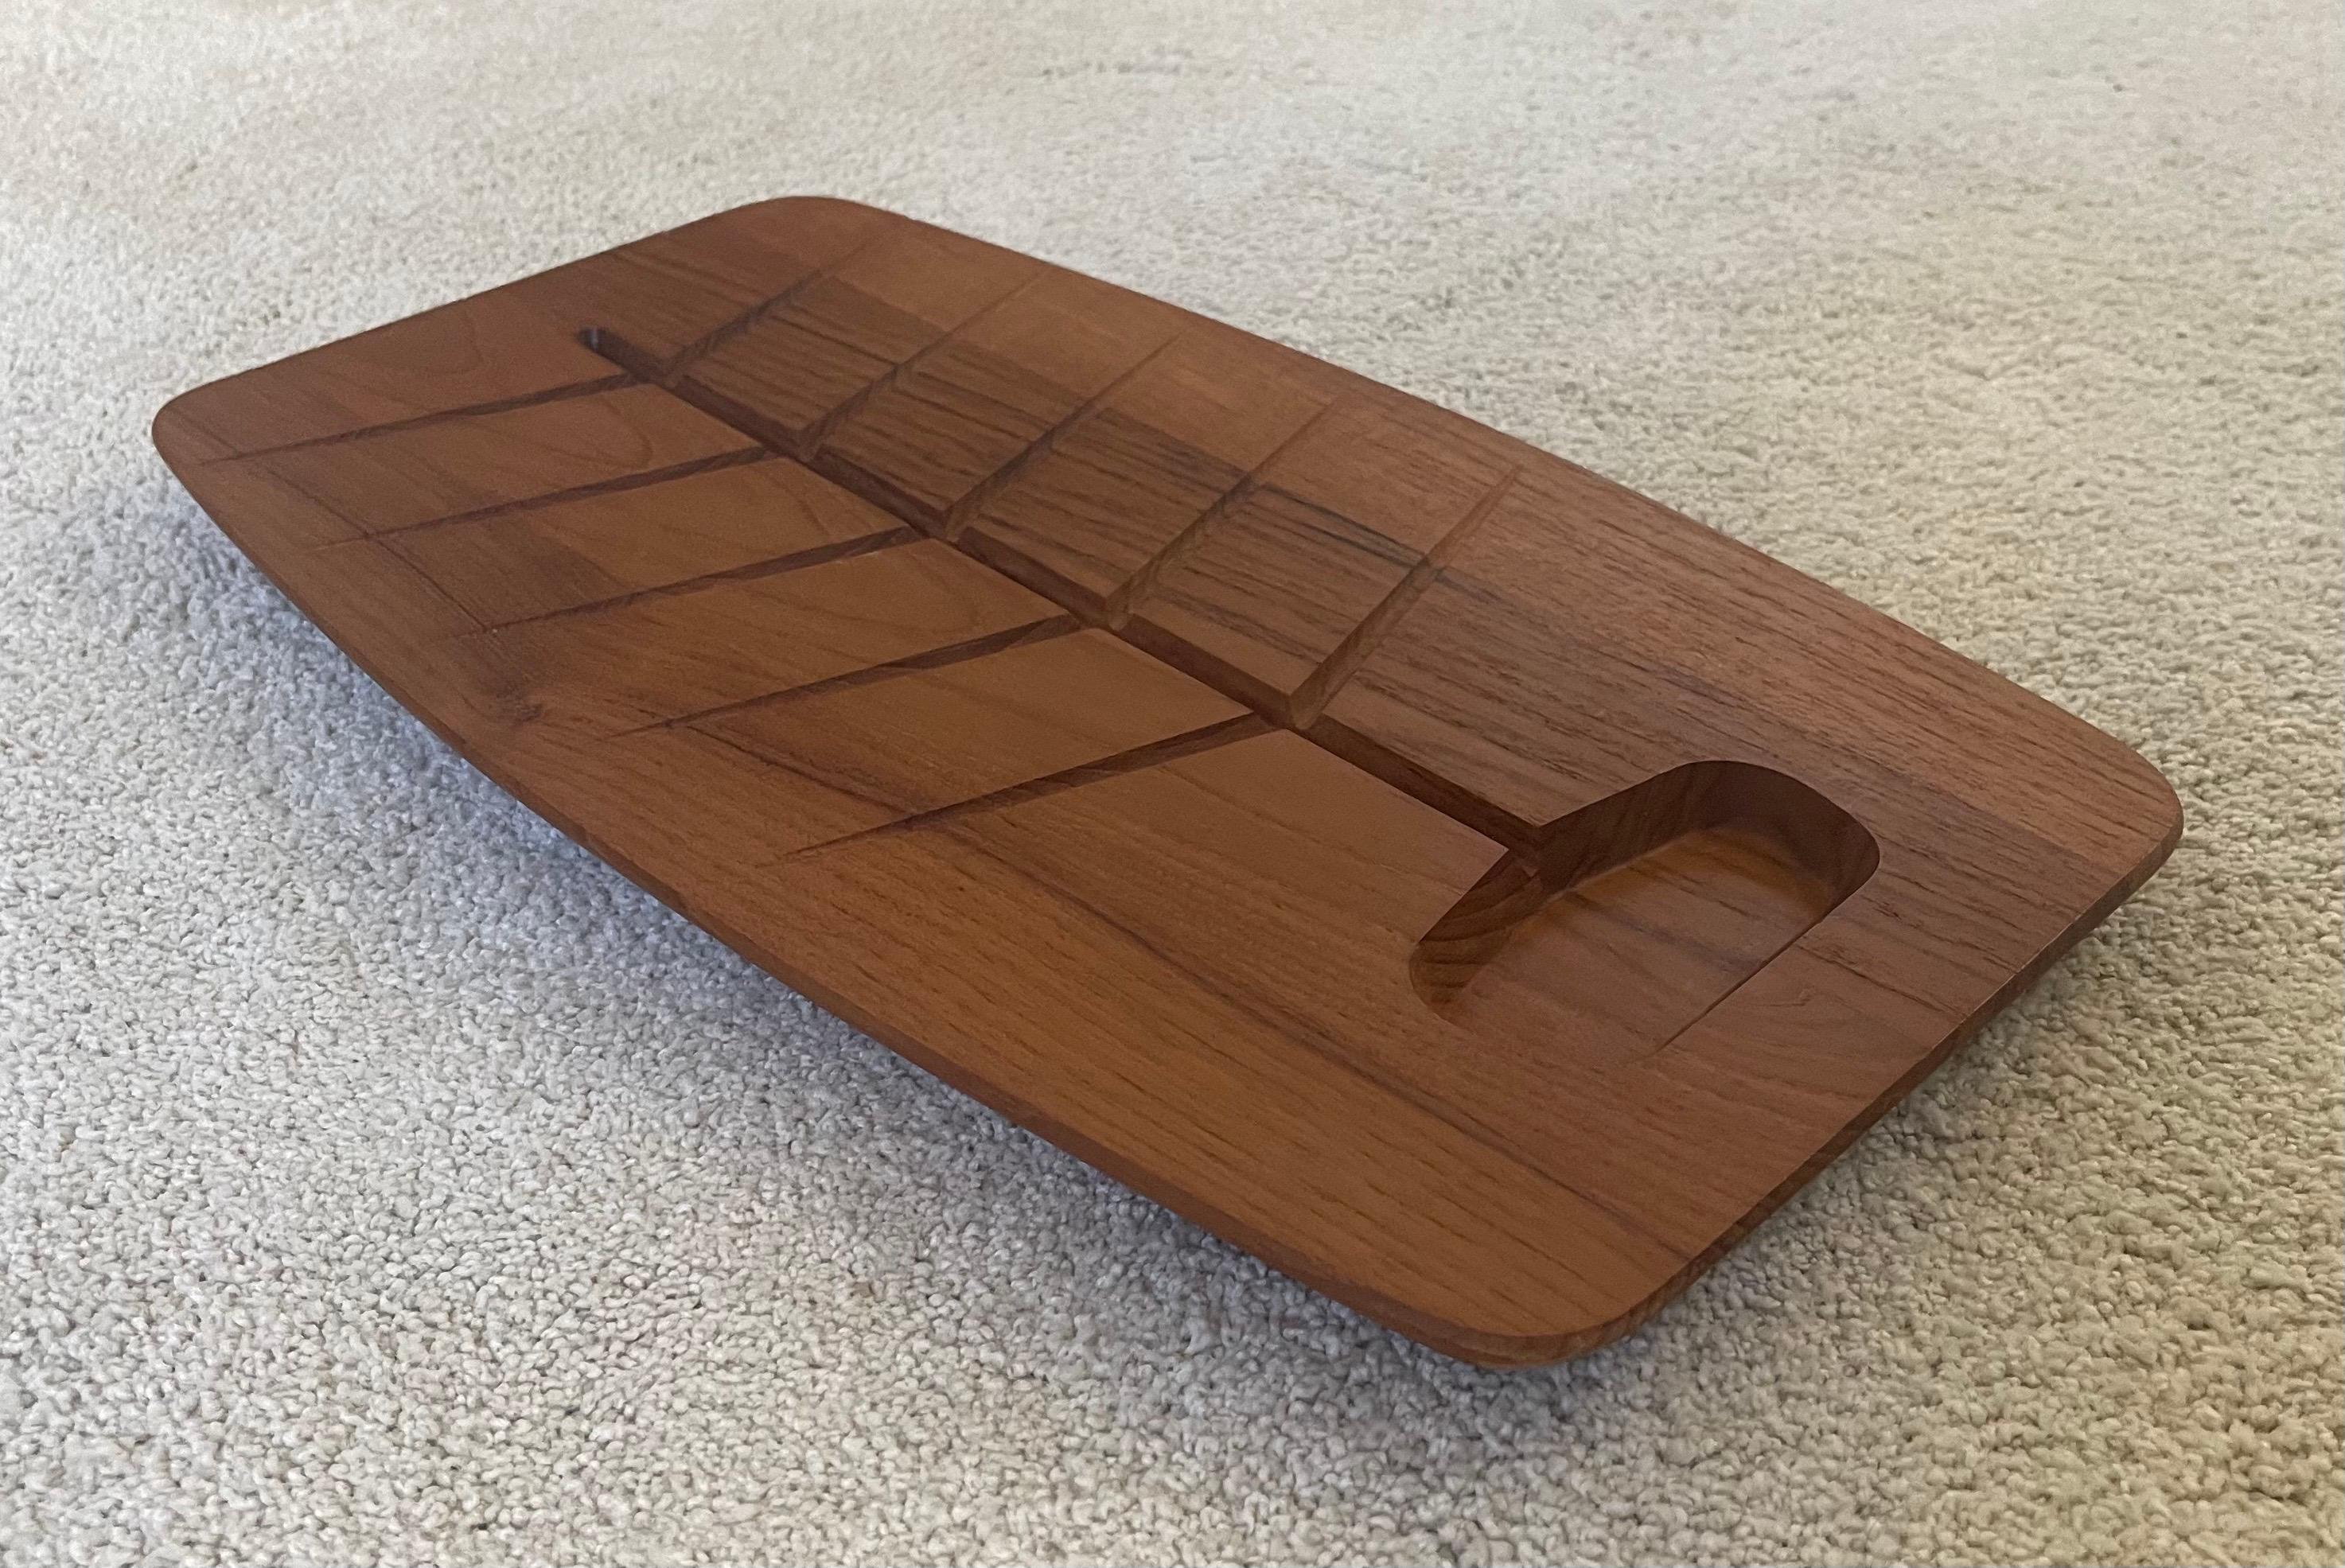 Danish modern staved teak surfboard style carving / cutting board in the style of Dansk, circa 1960s. The piece is very well made with a nice beveled edge and a built in drain for juices. 